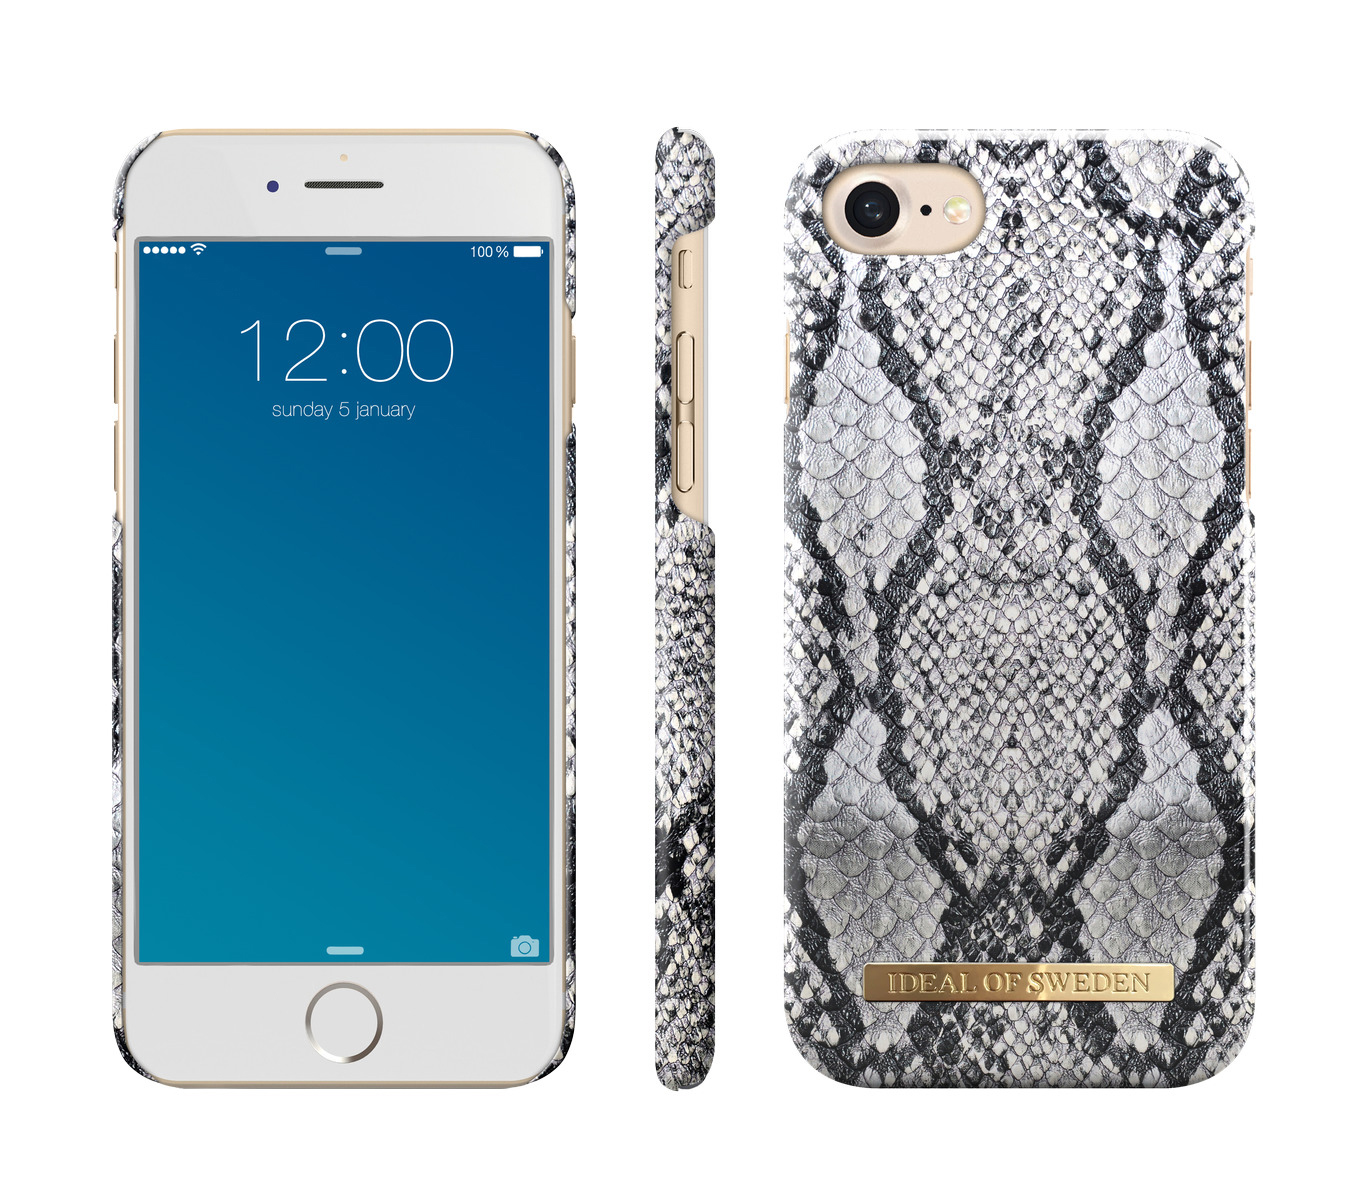 IDEAL OF SWEDEN iPhone iPhone Backcover, Python 8, Apple, Fashion, 6, 7, iPhone